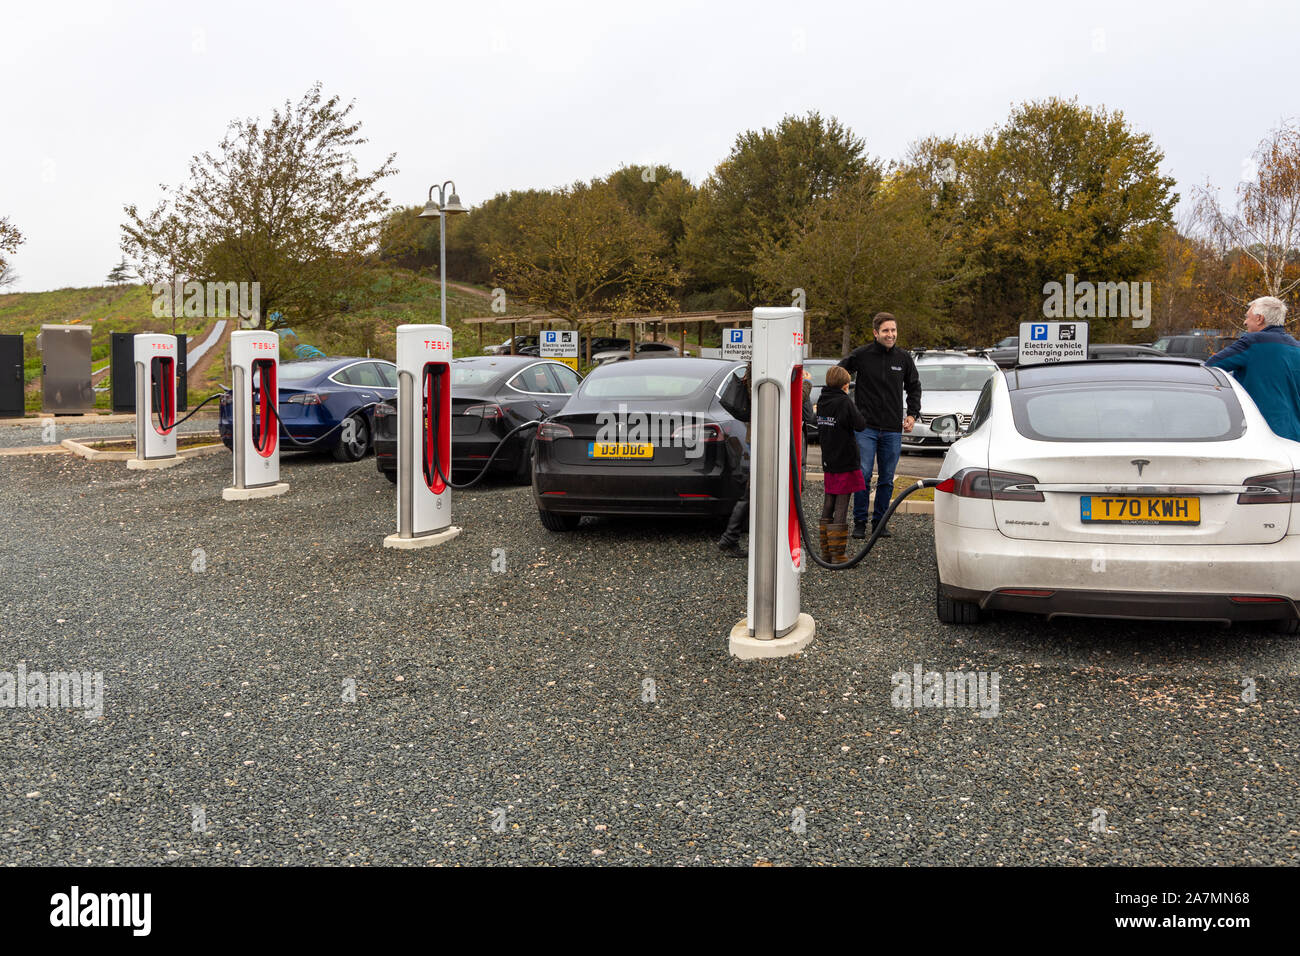 Tesla Cars charging at Darts Farm Superchargers, Exeter, Devon Stock Photo